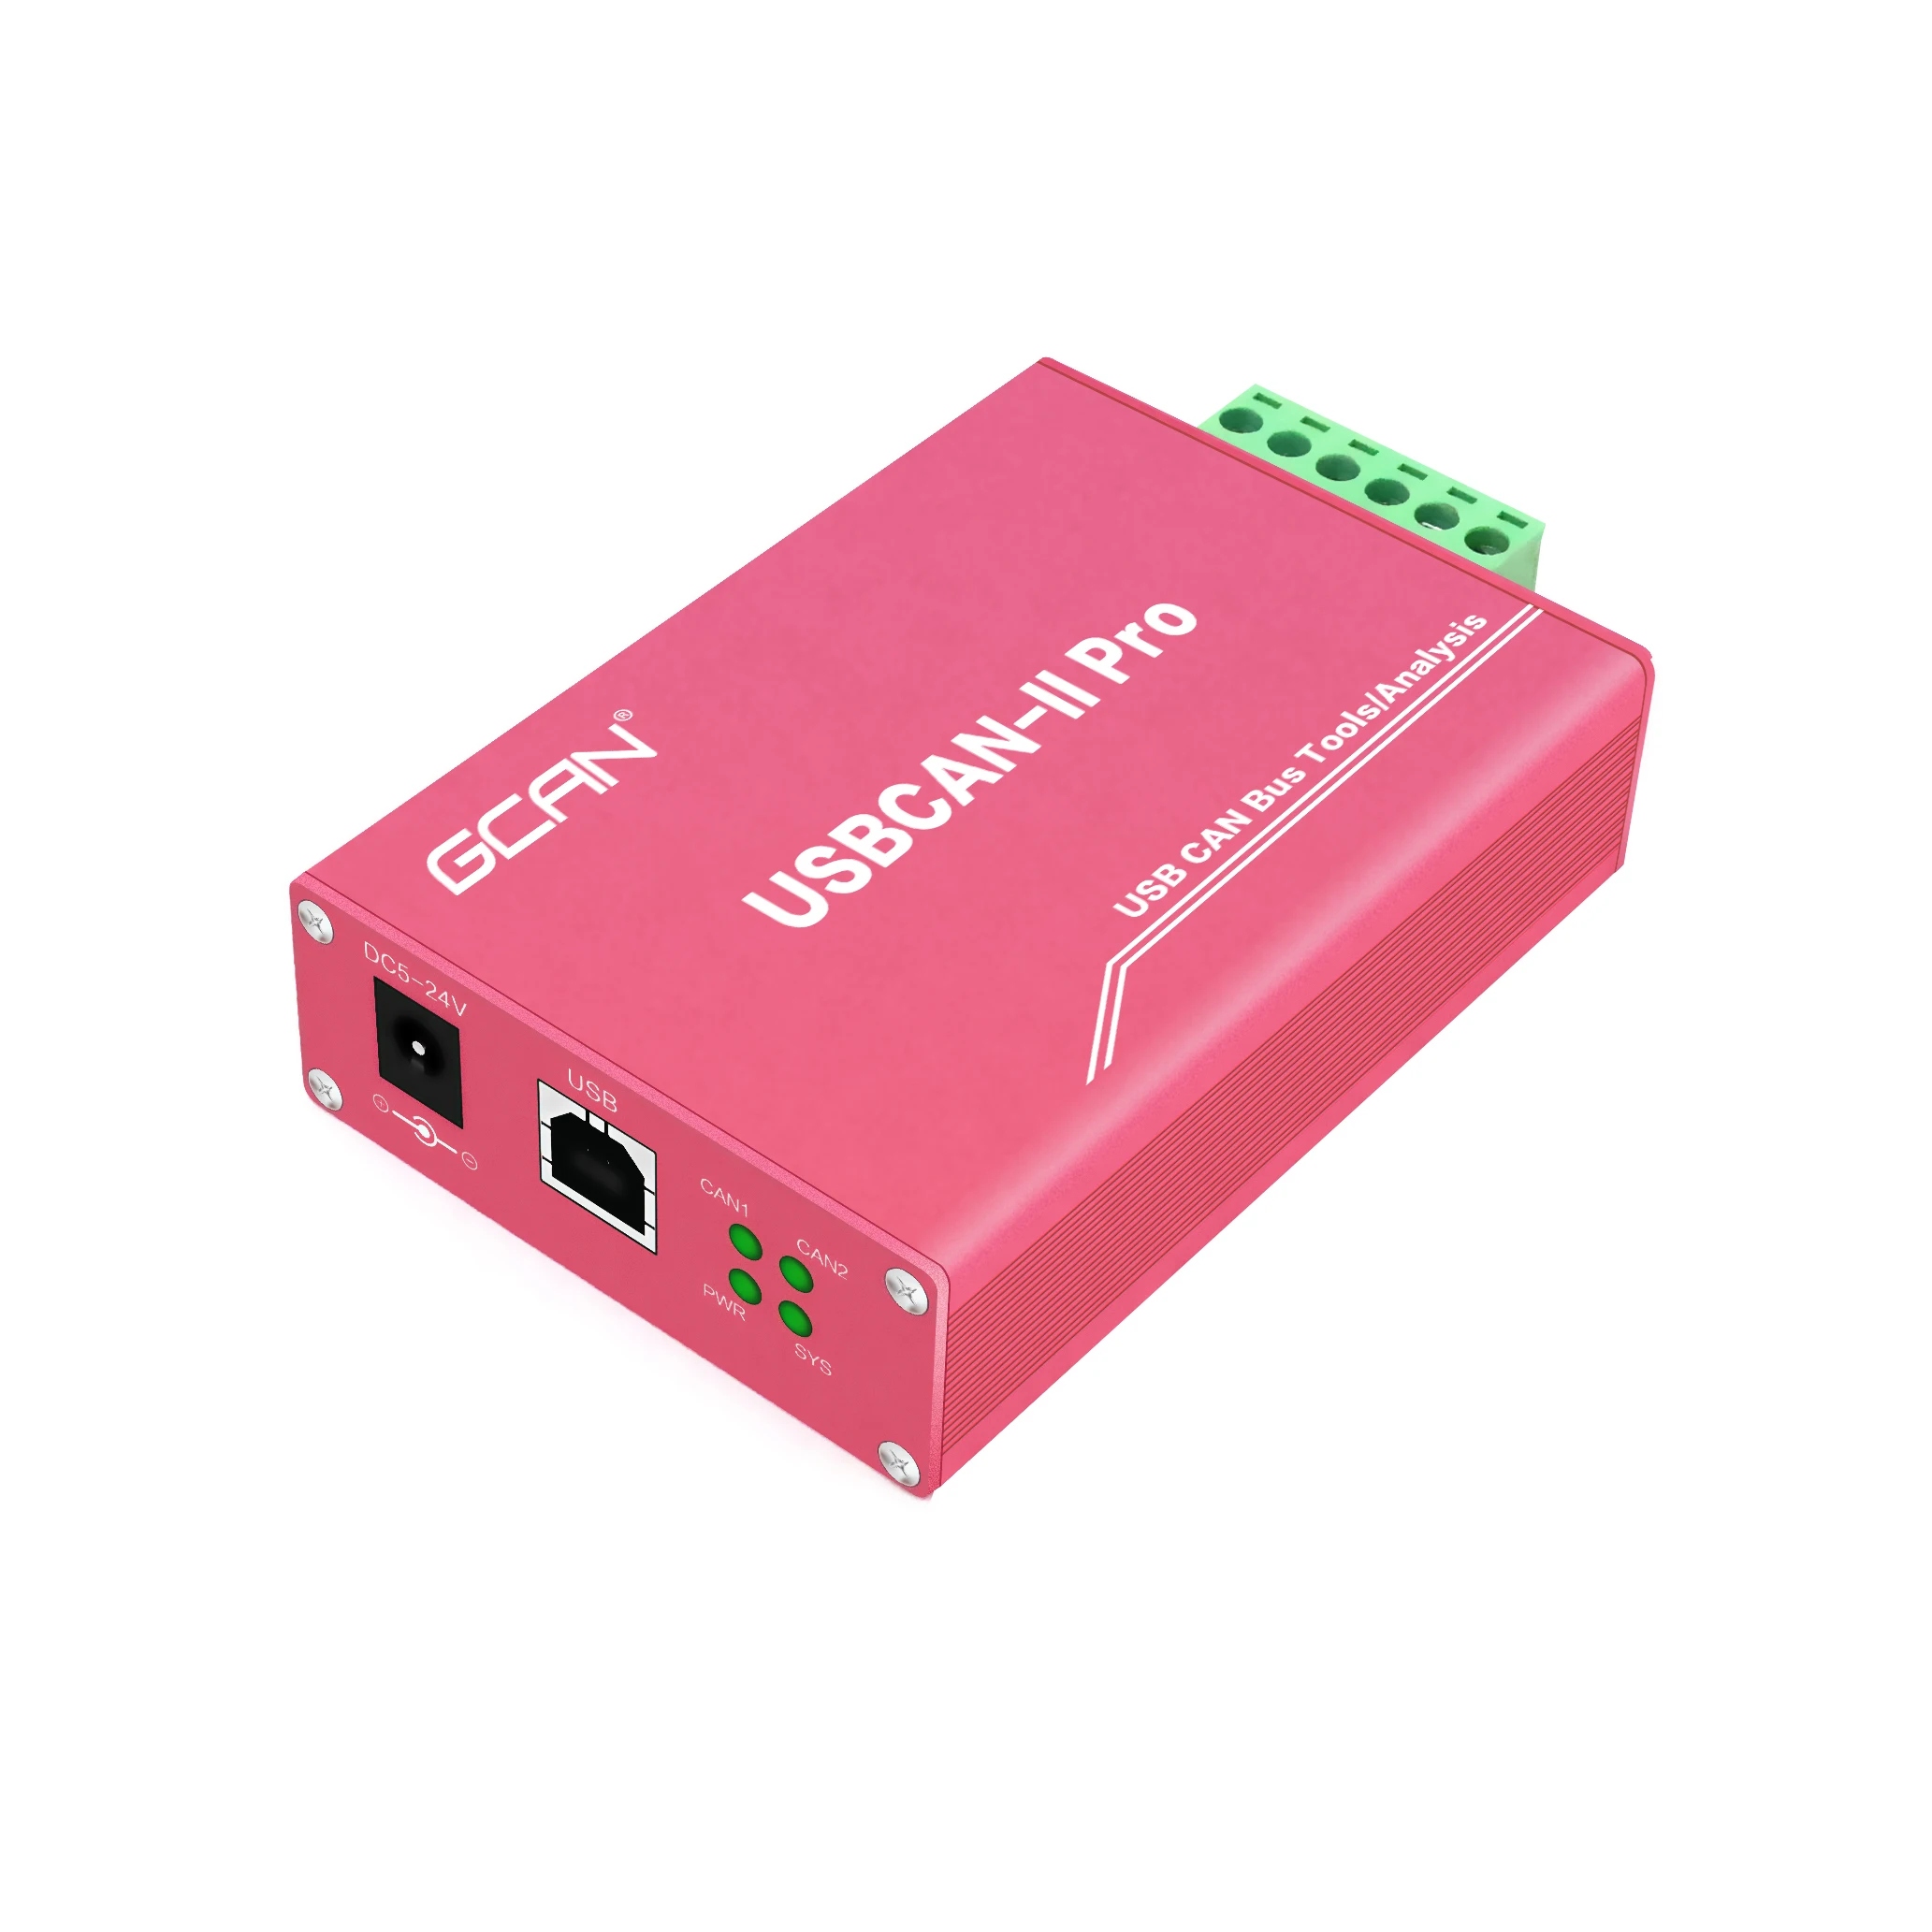 GCAN 2 Channel USB-CAN Adapter/Analyzer for BMS,  Usb to Can Adapter Support CANopen, J1939, ISO 15765 Protocol, DBC Files